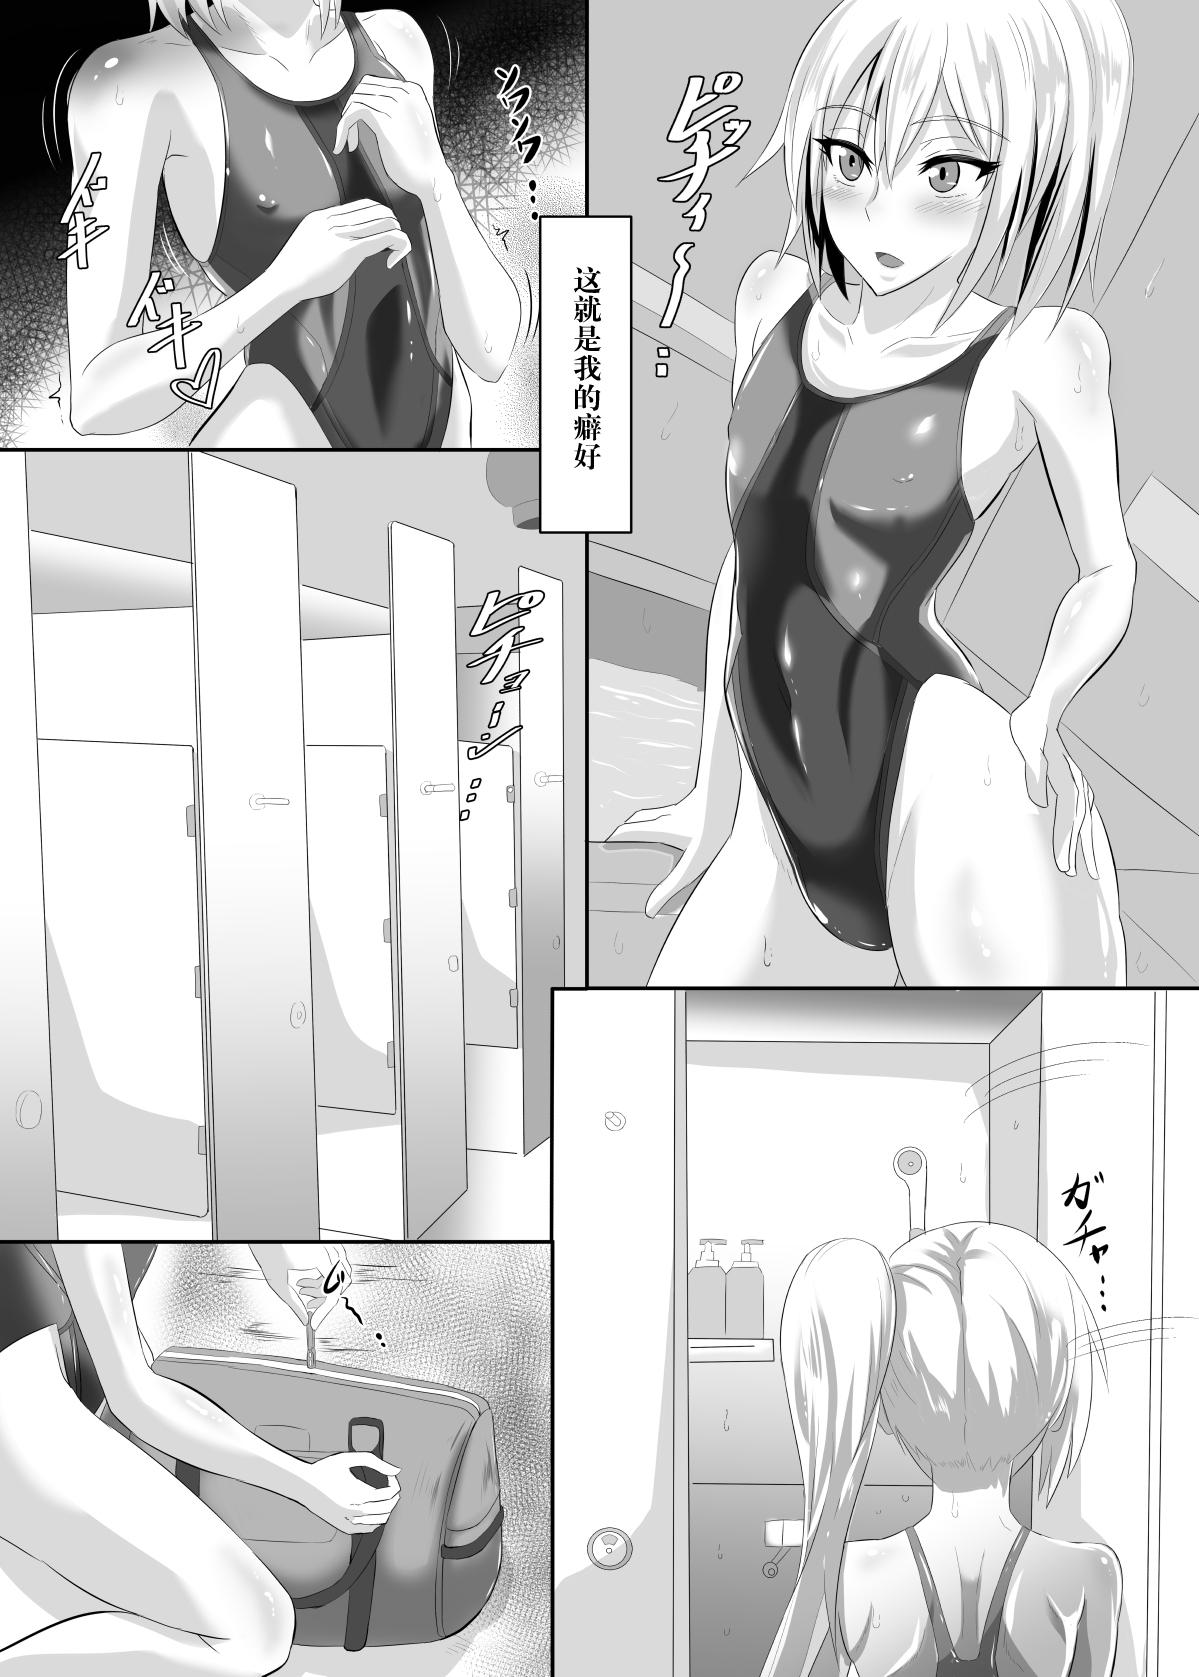 Bare Gehenna 6 - Fate grand order Stroking - Page 11